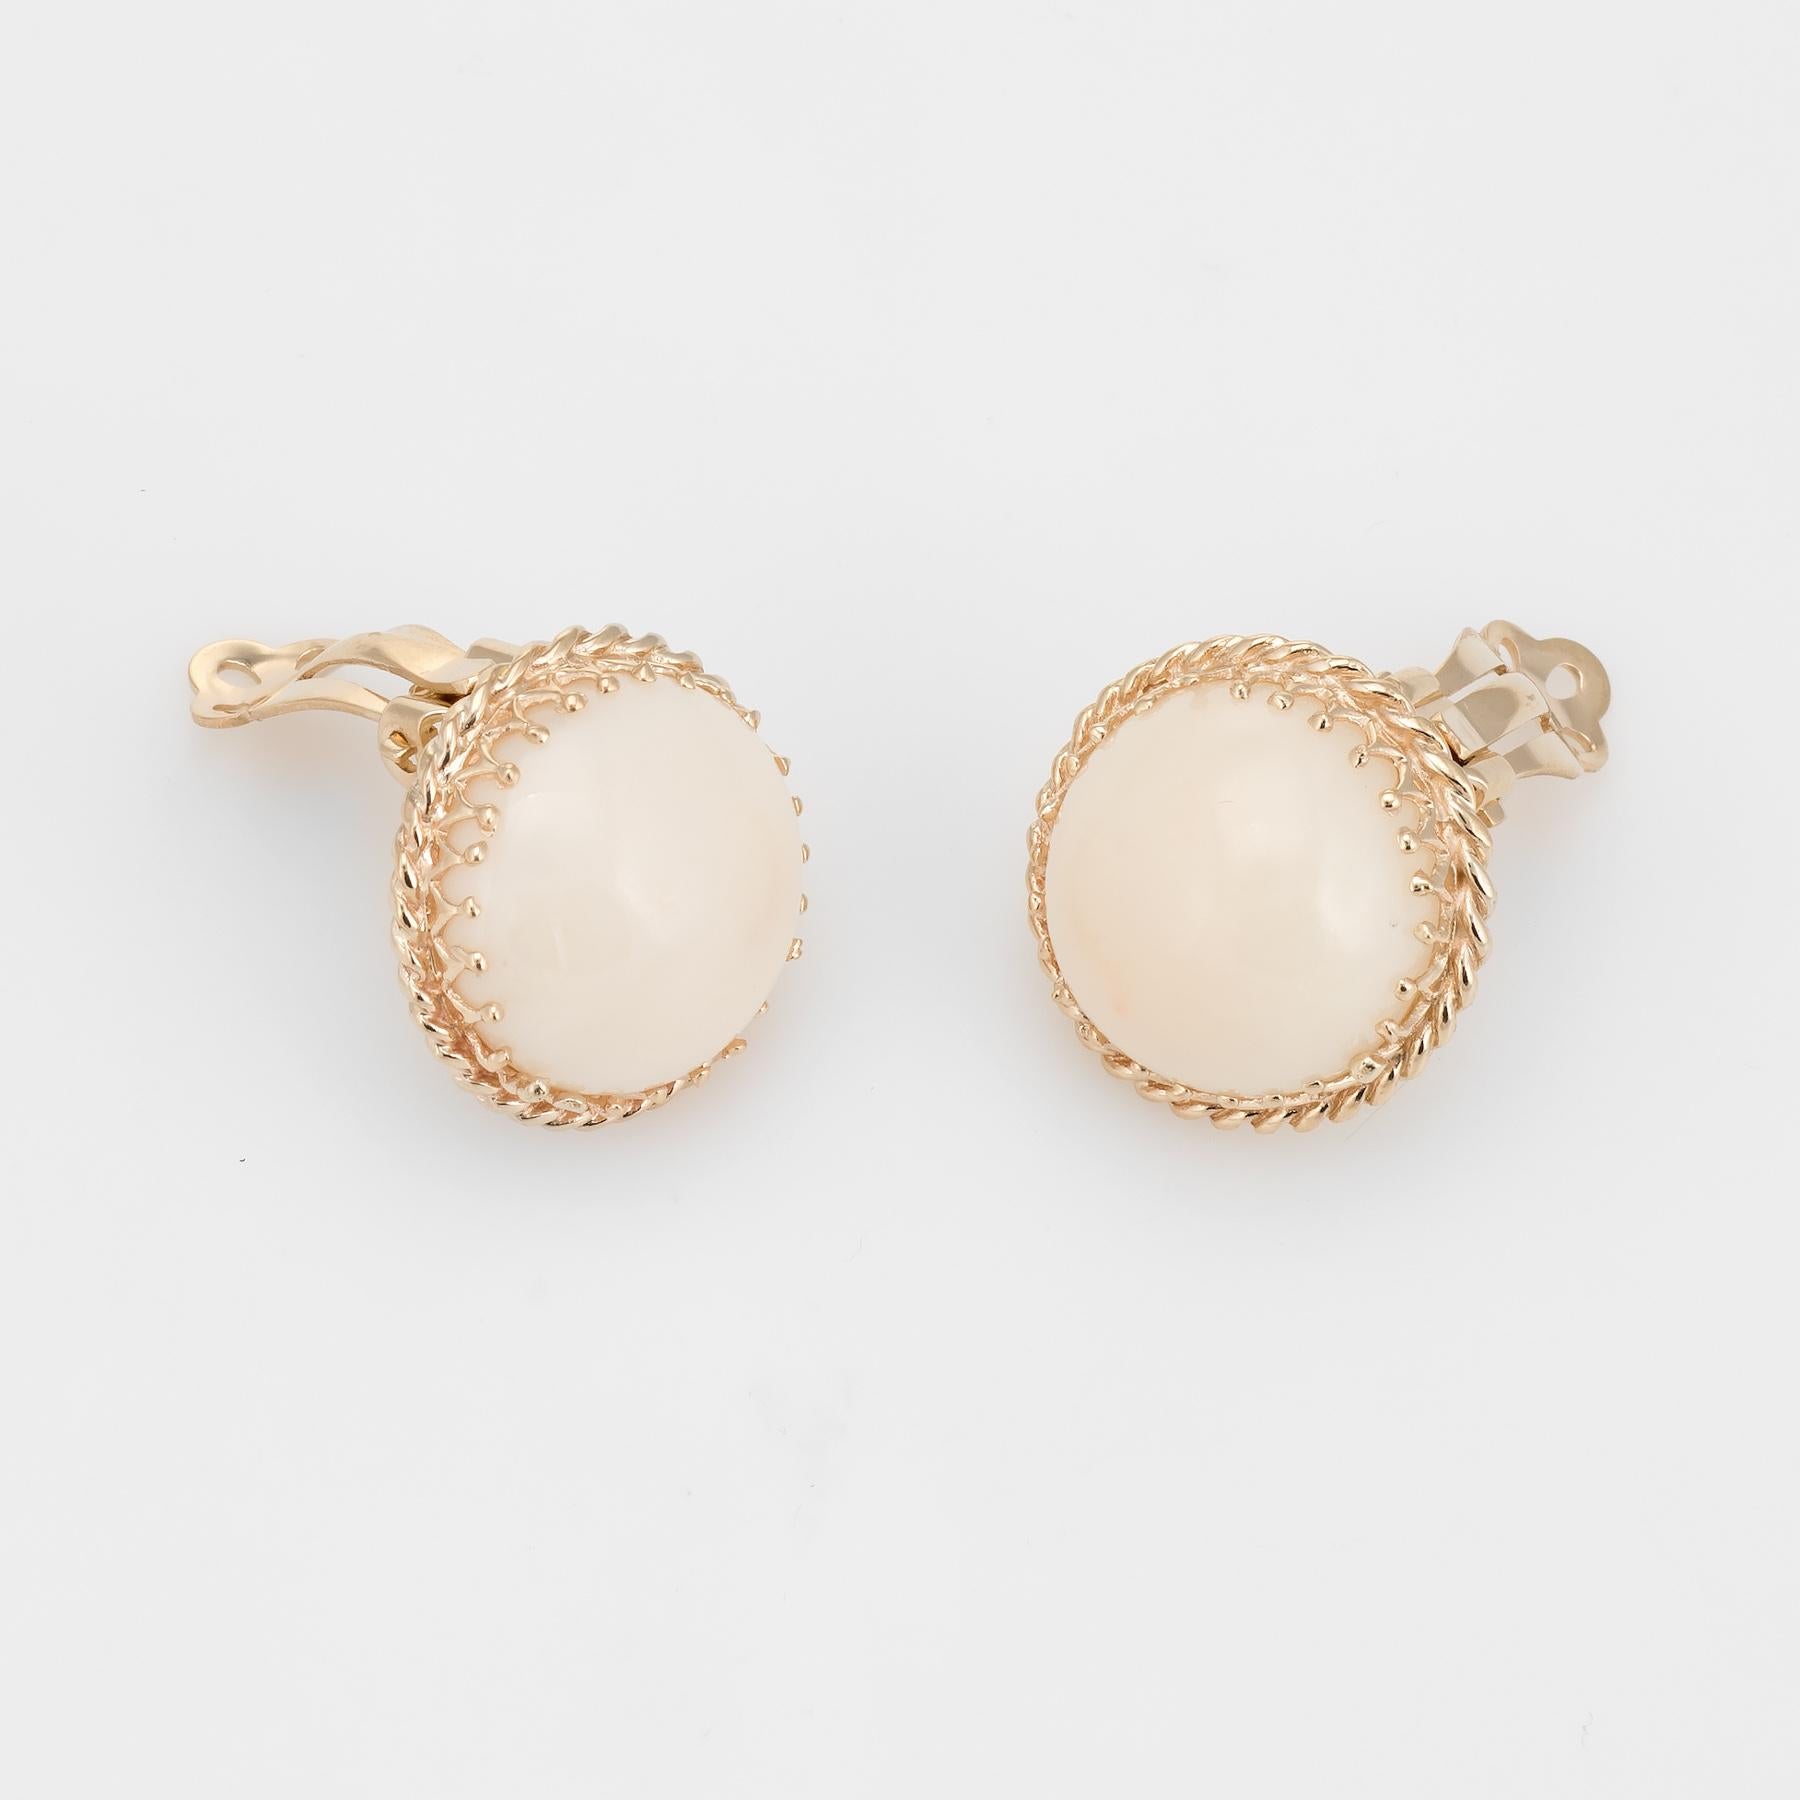 Finely detailed pair of vintage angel skin coral clip earrings (circa 1950s to 1960s), crafted in 14k yellow gold. 

Cabochon cut angel skin coral measures 15mm each - 9 carats each (18 carats total estimated weight). The coral is in excellent